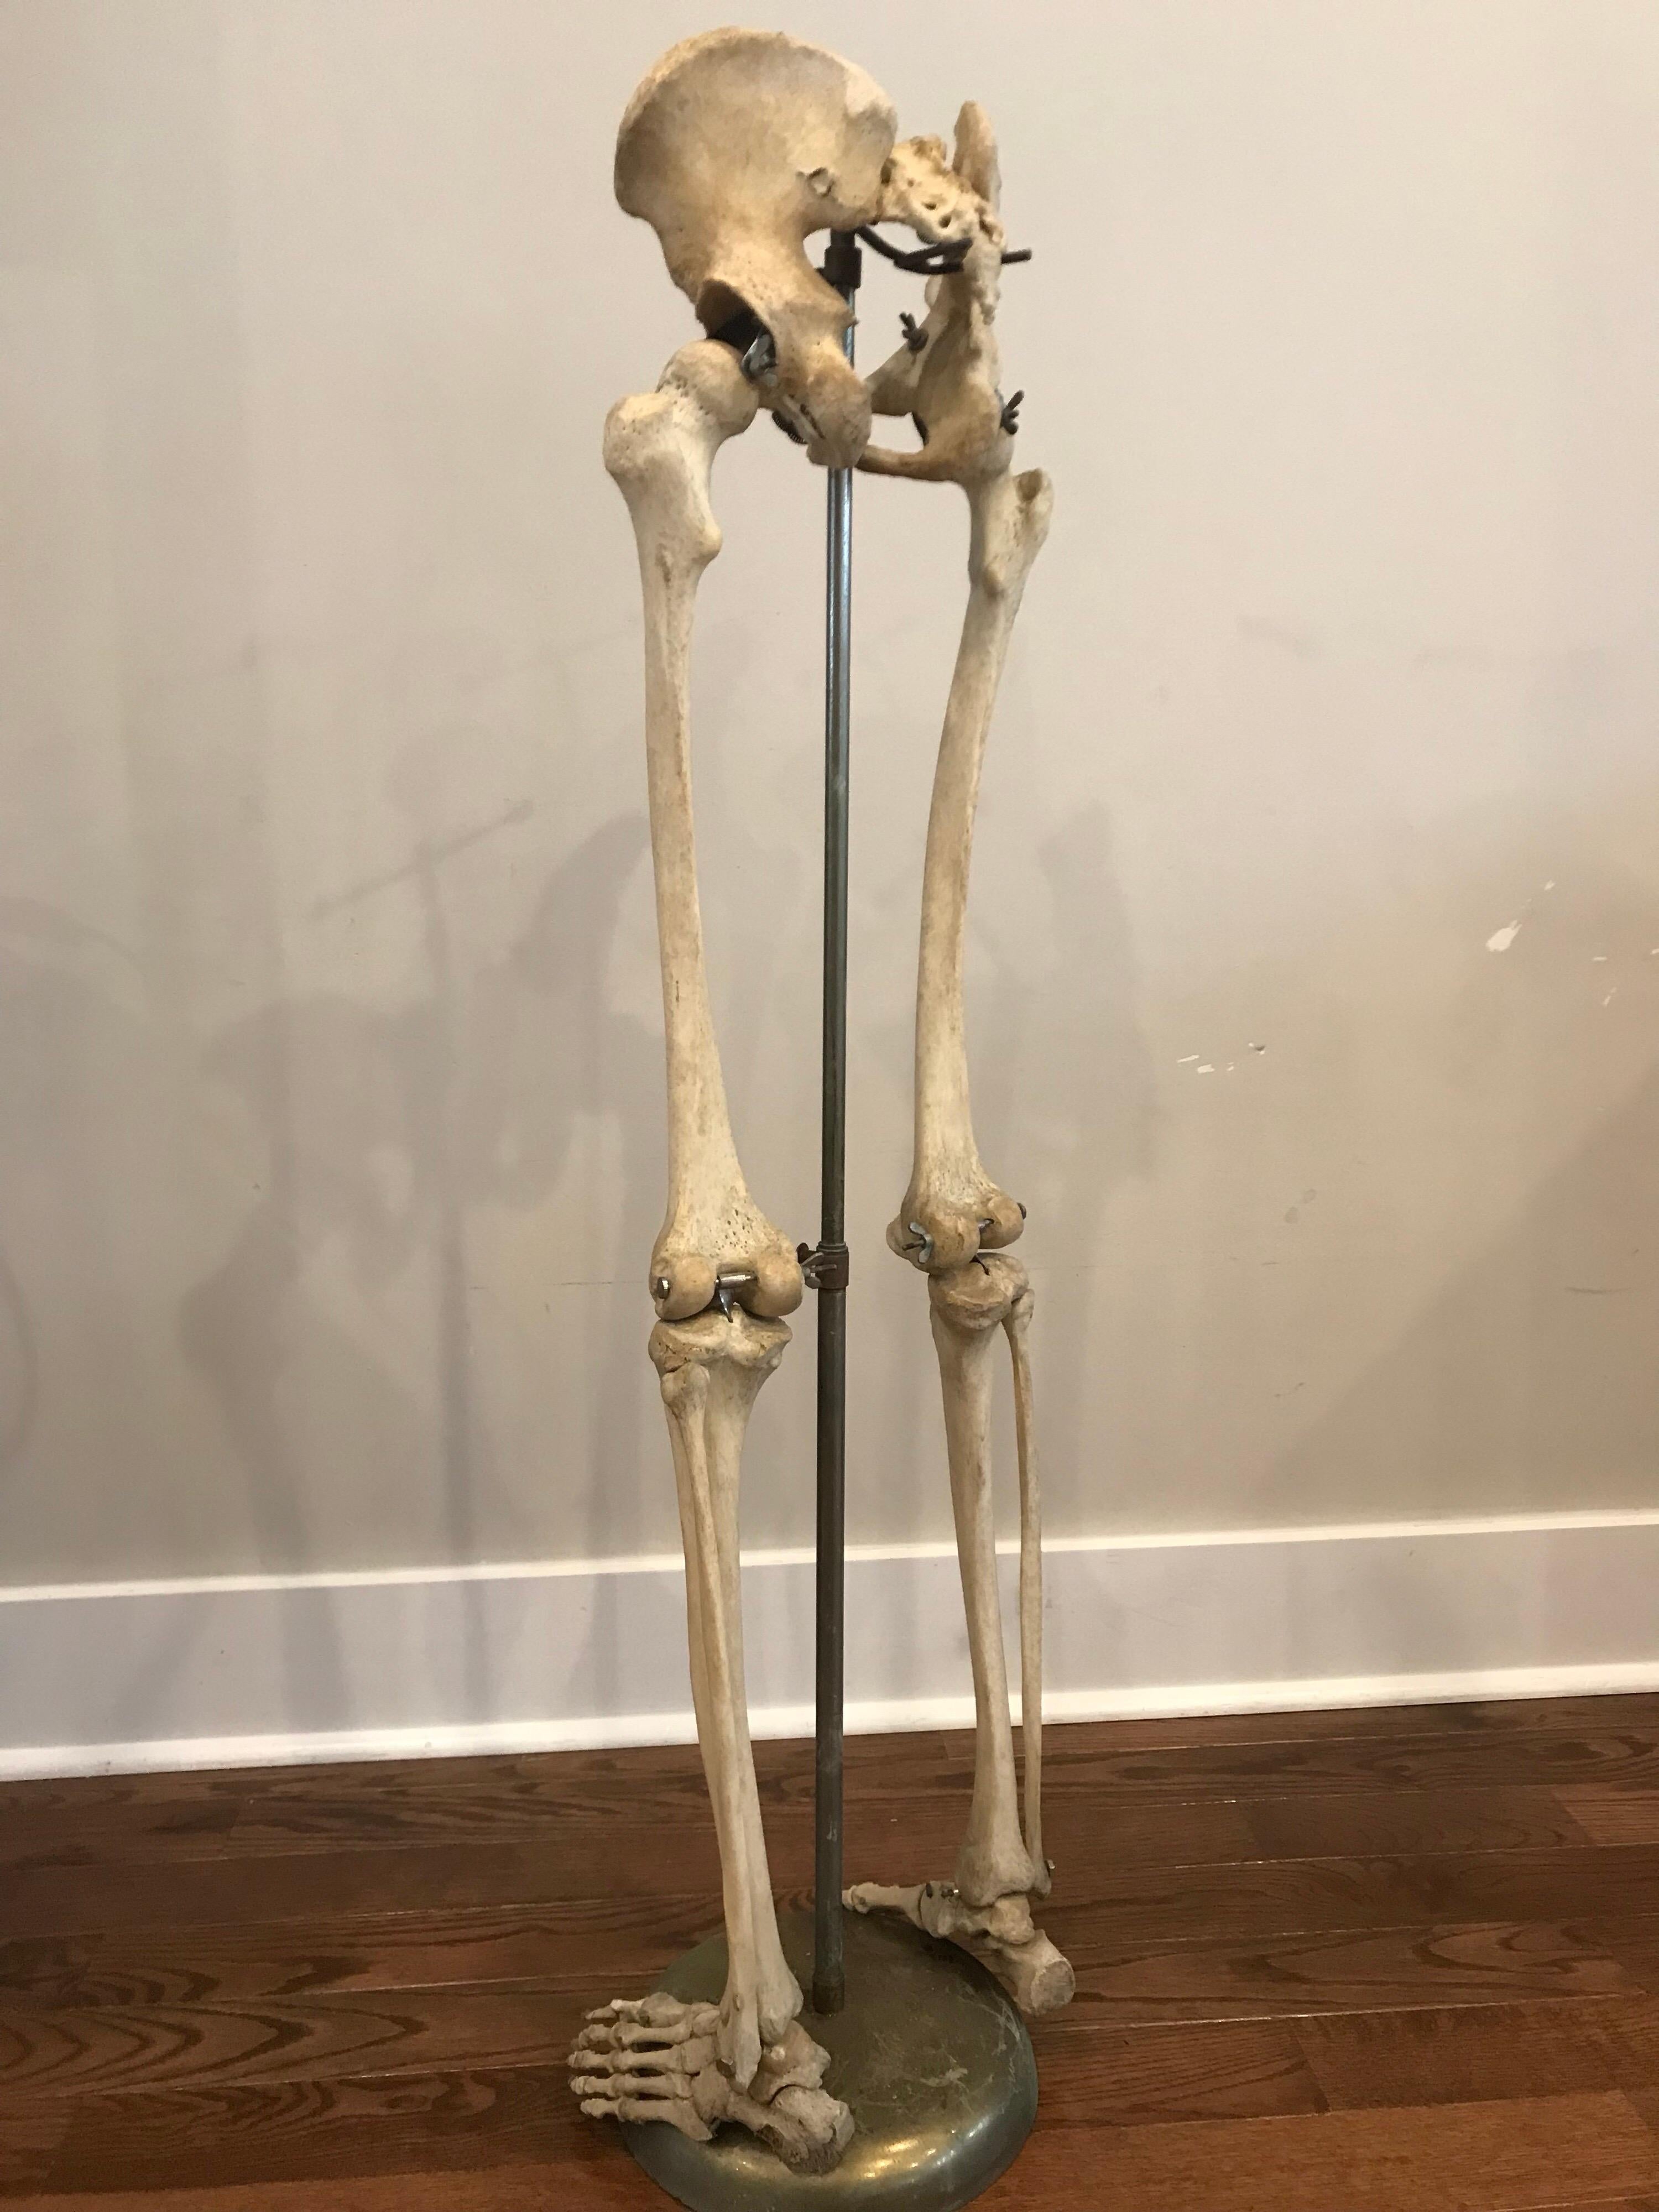 Real Human Skeleton of Articulating Lower Extremities Leg & Foot Bones on Stand 2